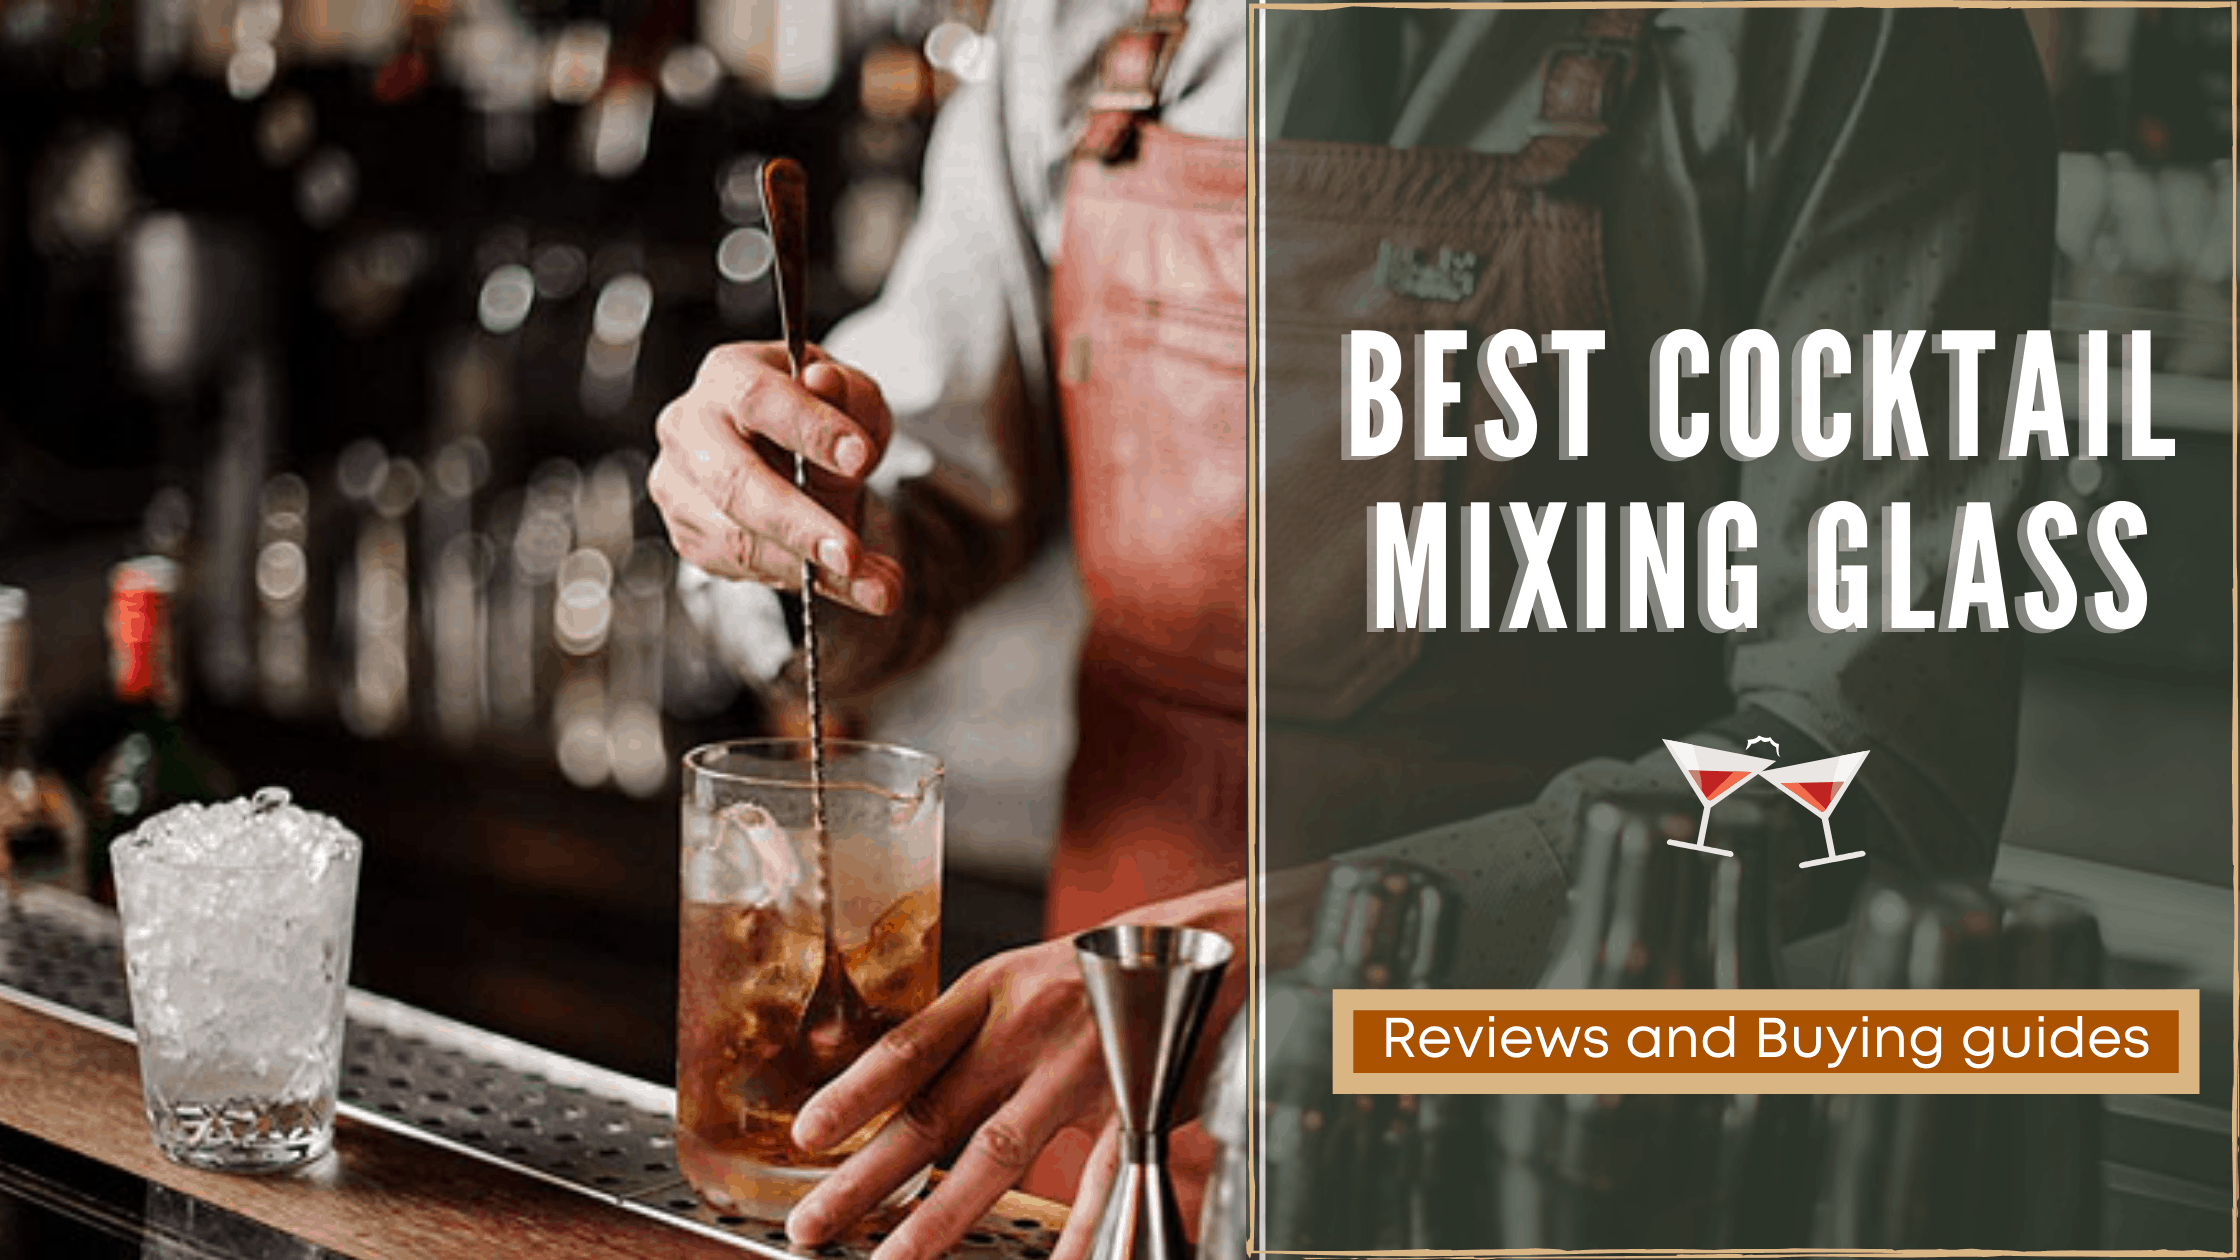 Best Cocktail Mixing Glass